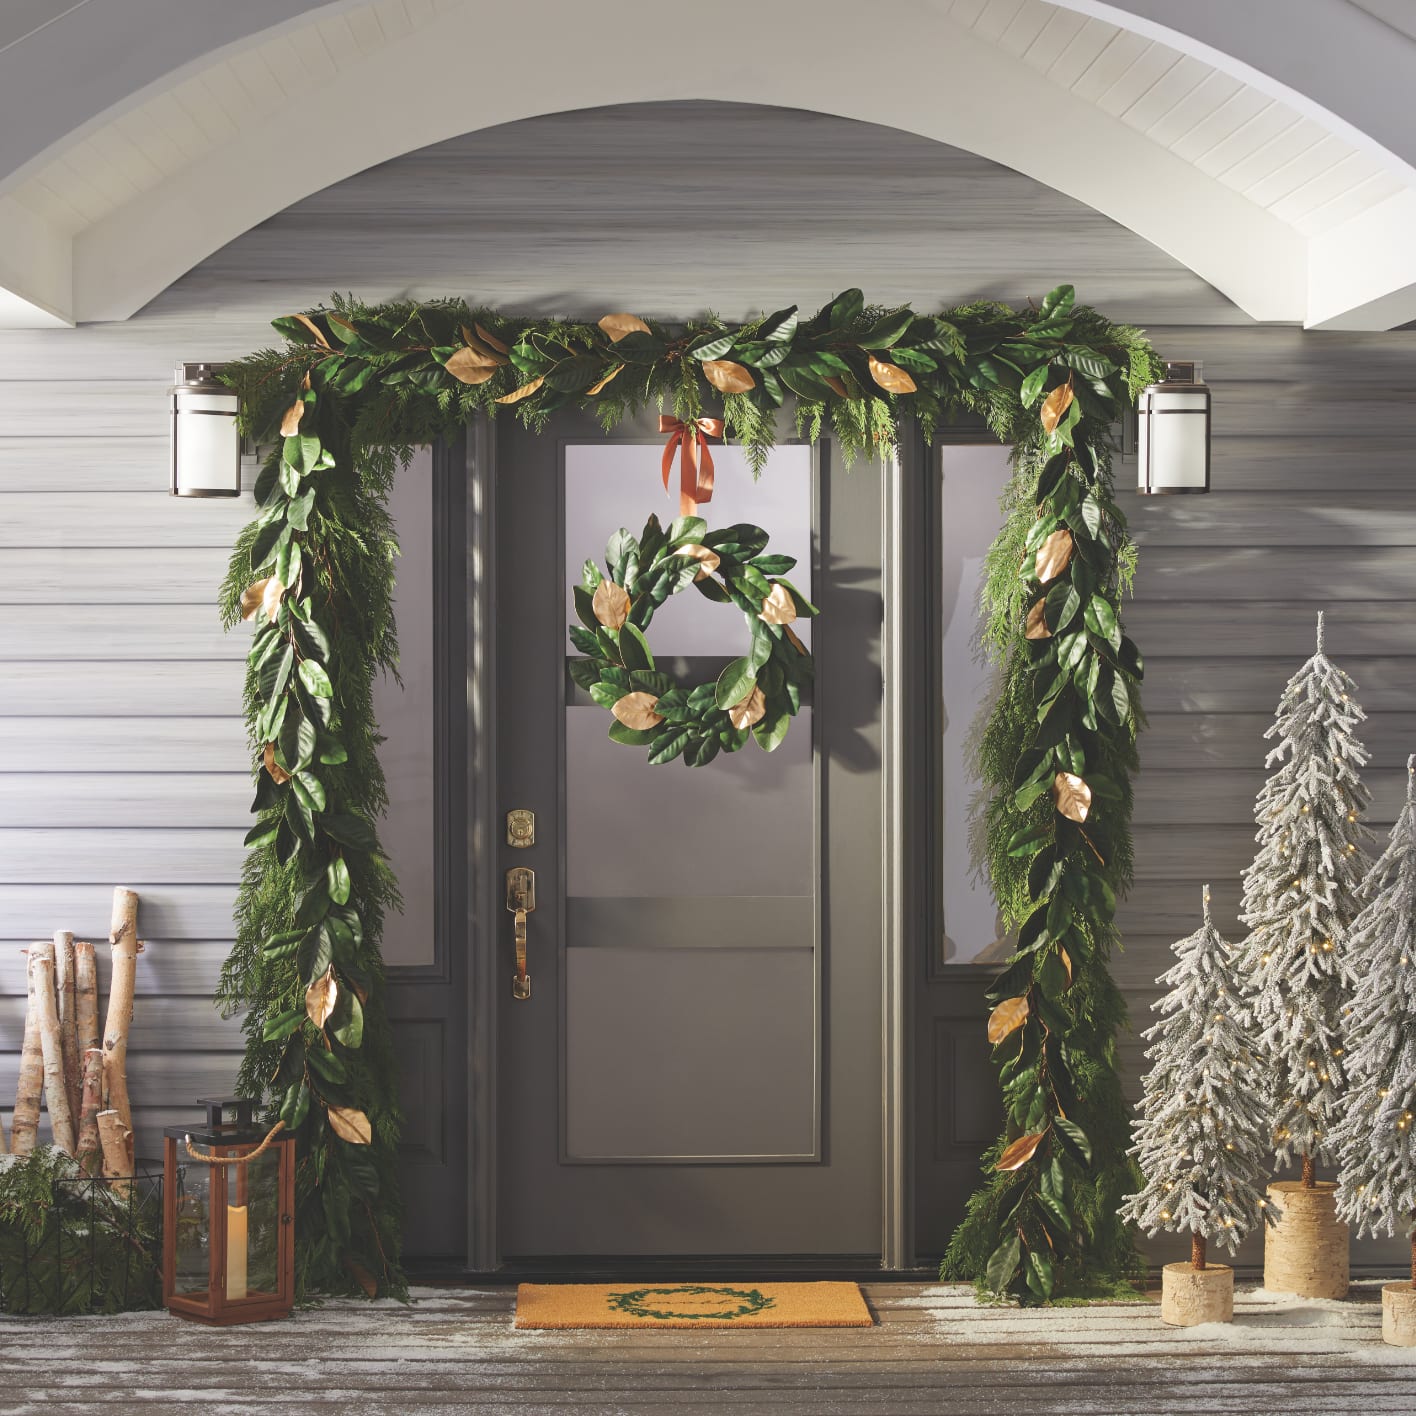 CANVAS wreath, garland and potted trees.